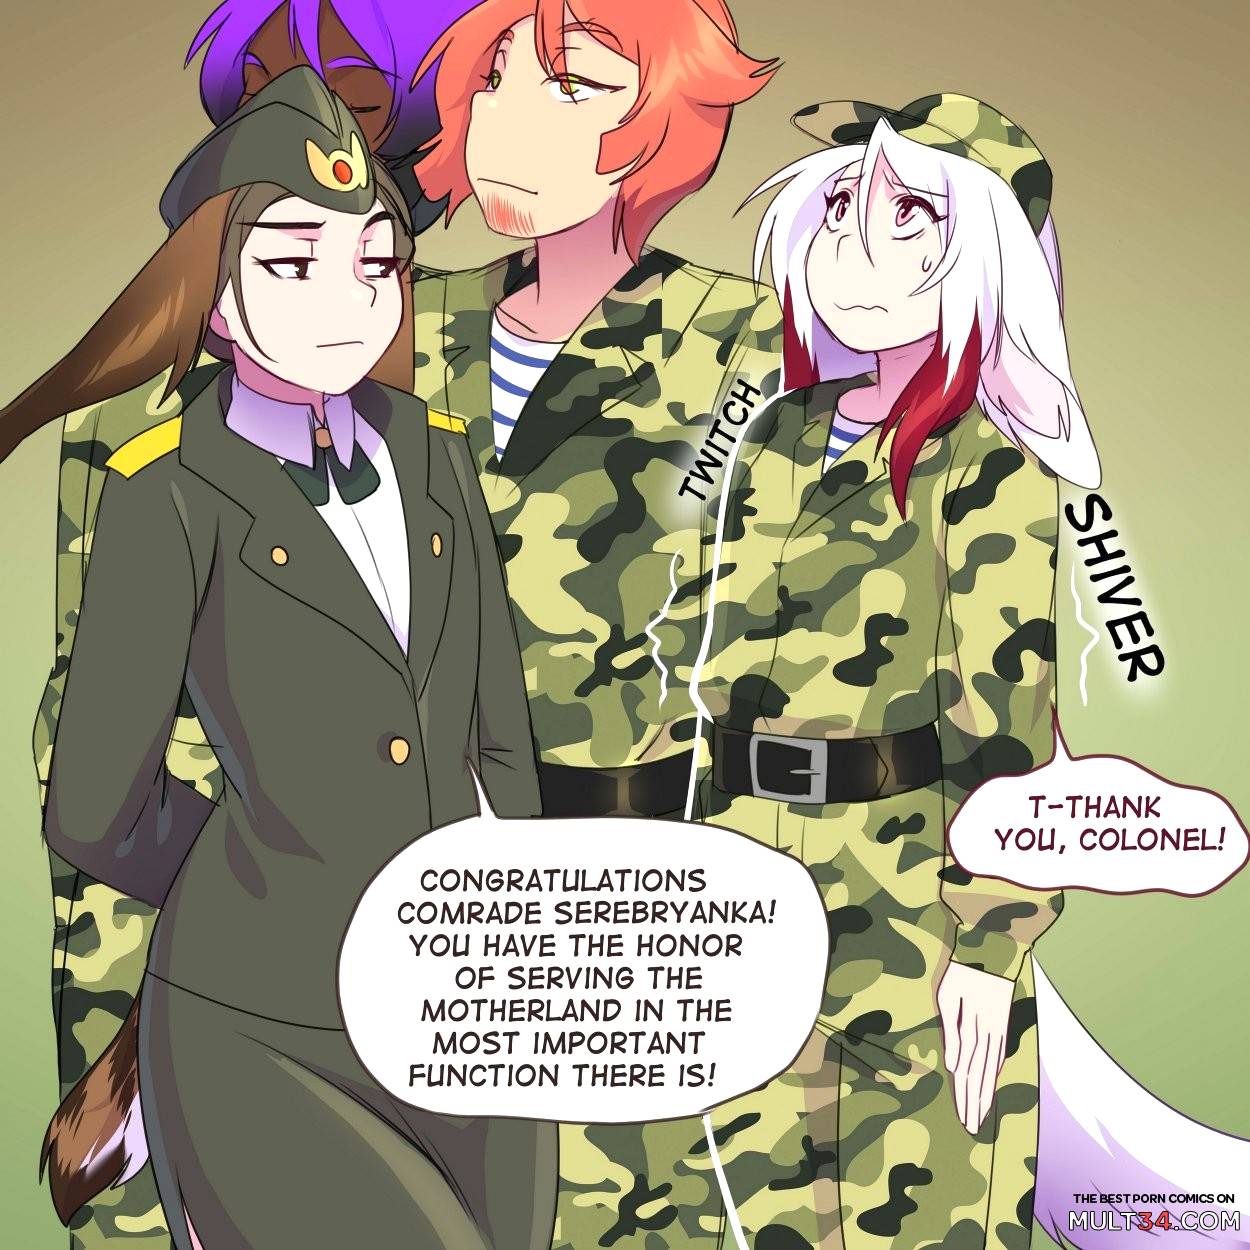 Russian Cartoon Porn - Silver Joins the Russian Army! porn comic - the best cartoon porn comics,  Rule 34 | MULT34